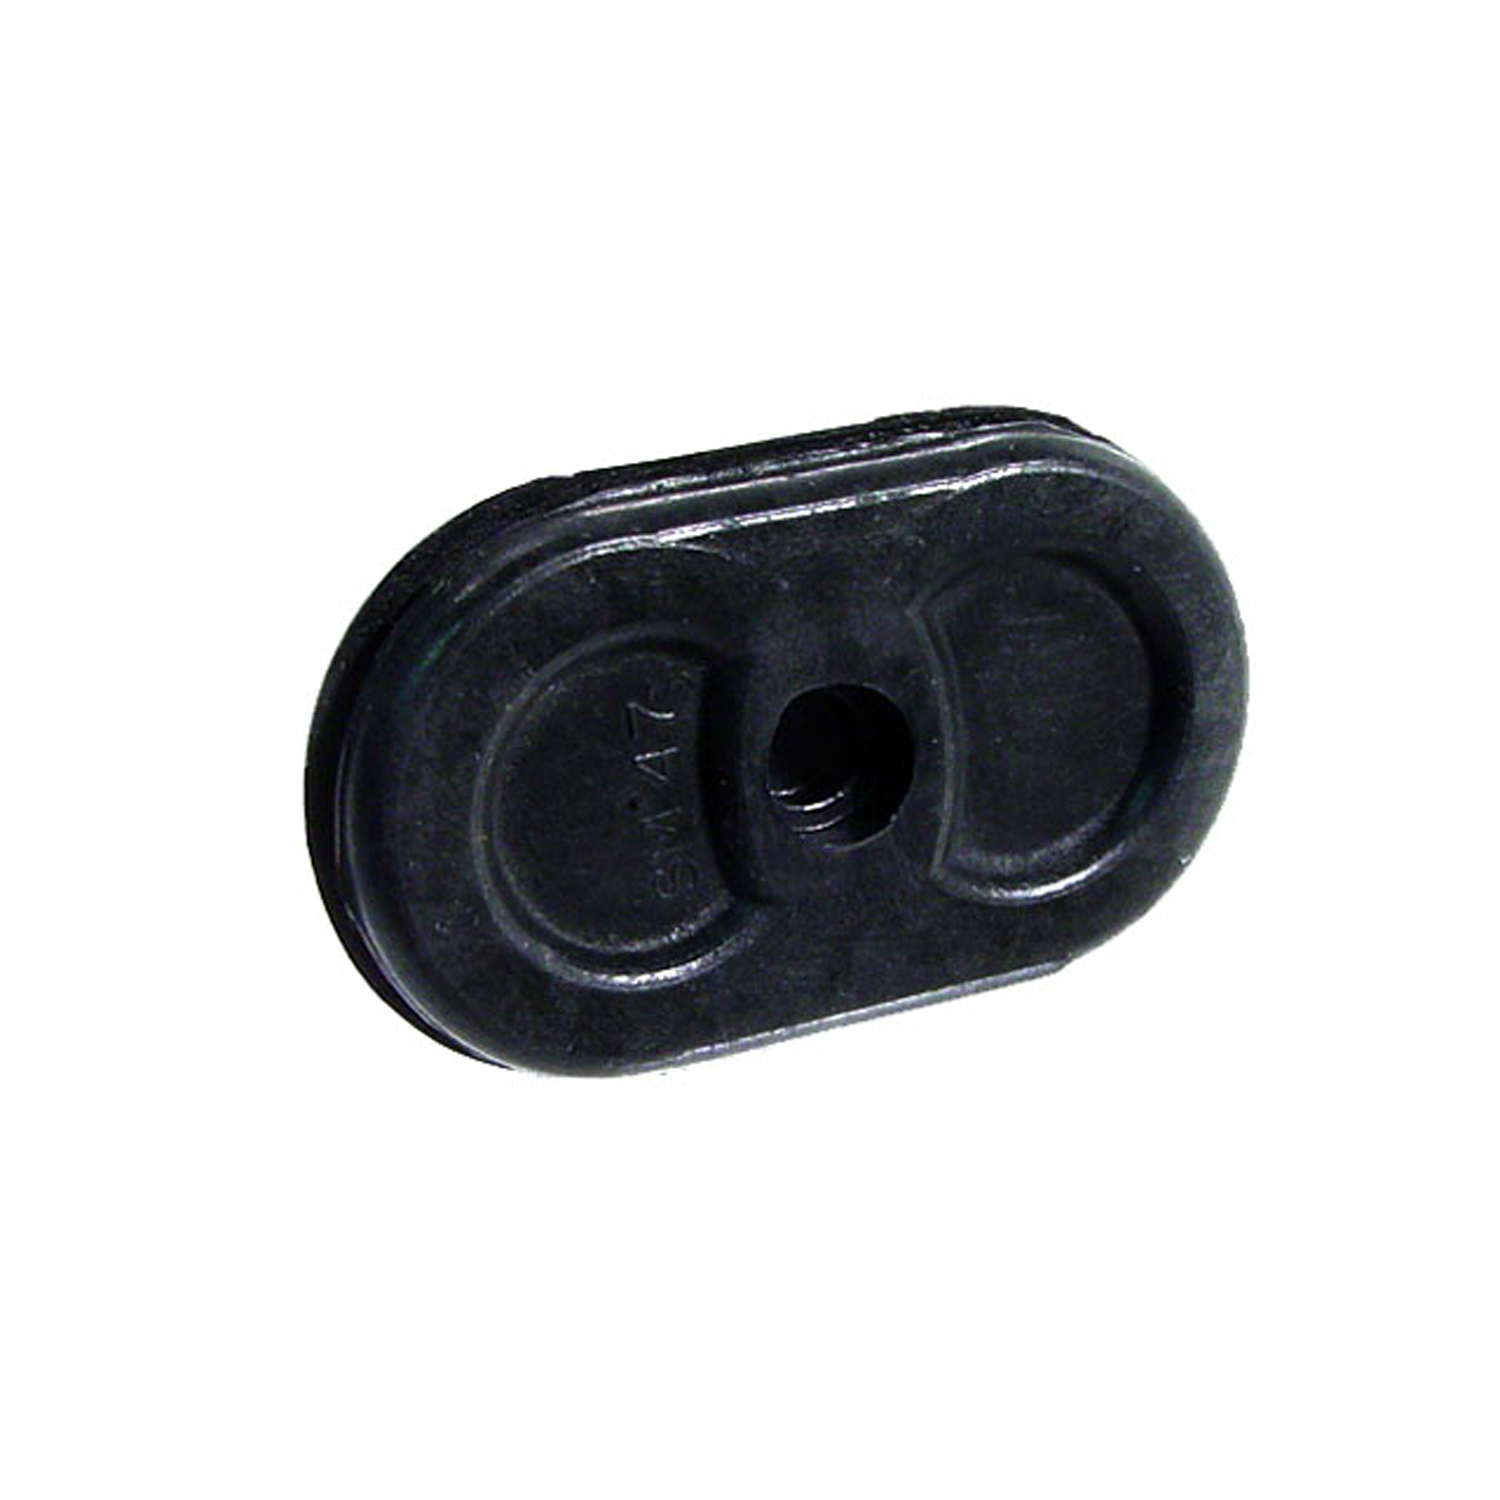 1940 Oldsmobile Series 70 Speedometer Cable Firewall Grommet.  Fits 1-7/8 long hole-SM 47